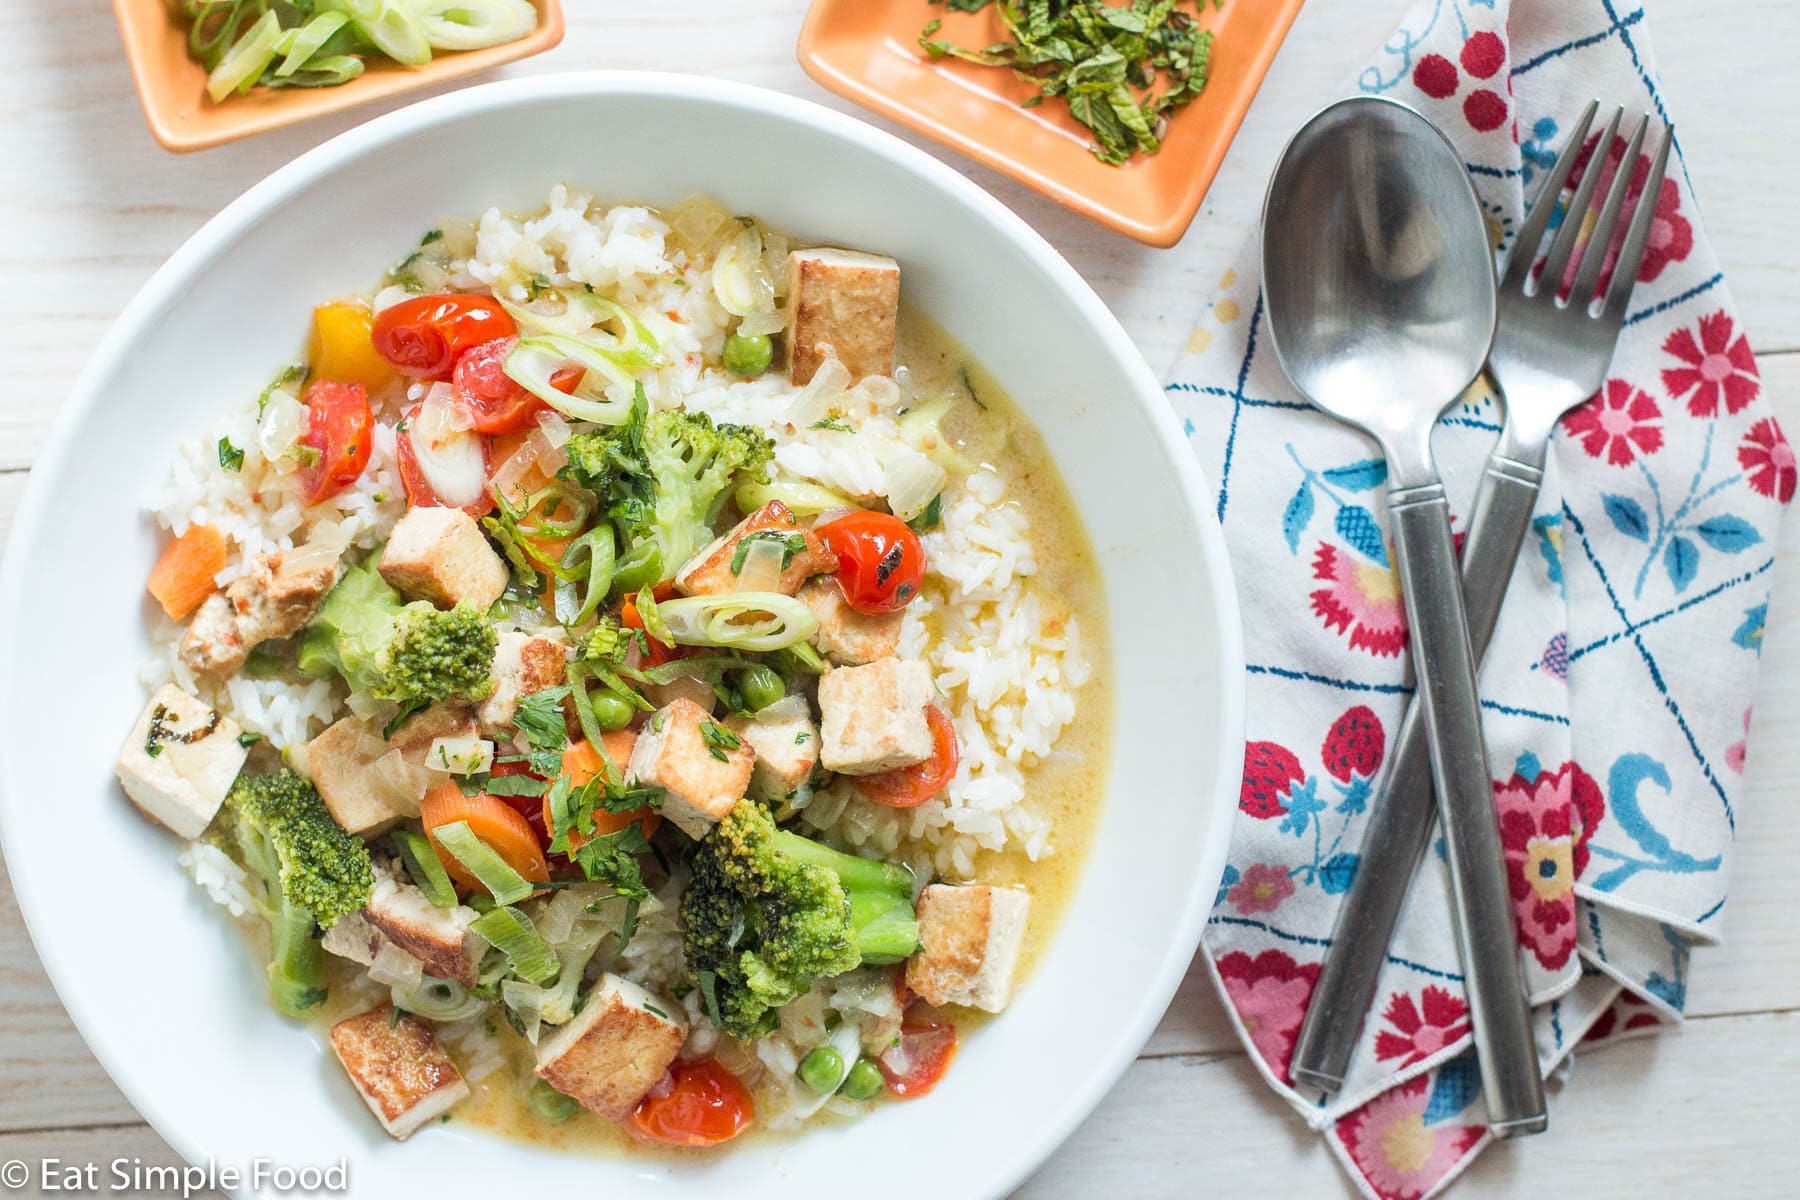 Top view of white plate/bowl of white rice covered in a yellow curry sauce with cubed tofu, broccoli, cherry tomatoes, and peas. Fork and spoon on napkin on side.